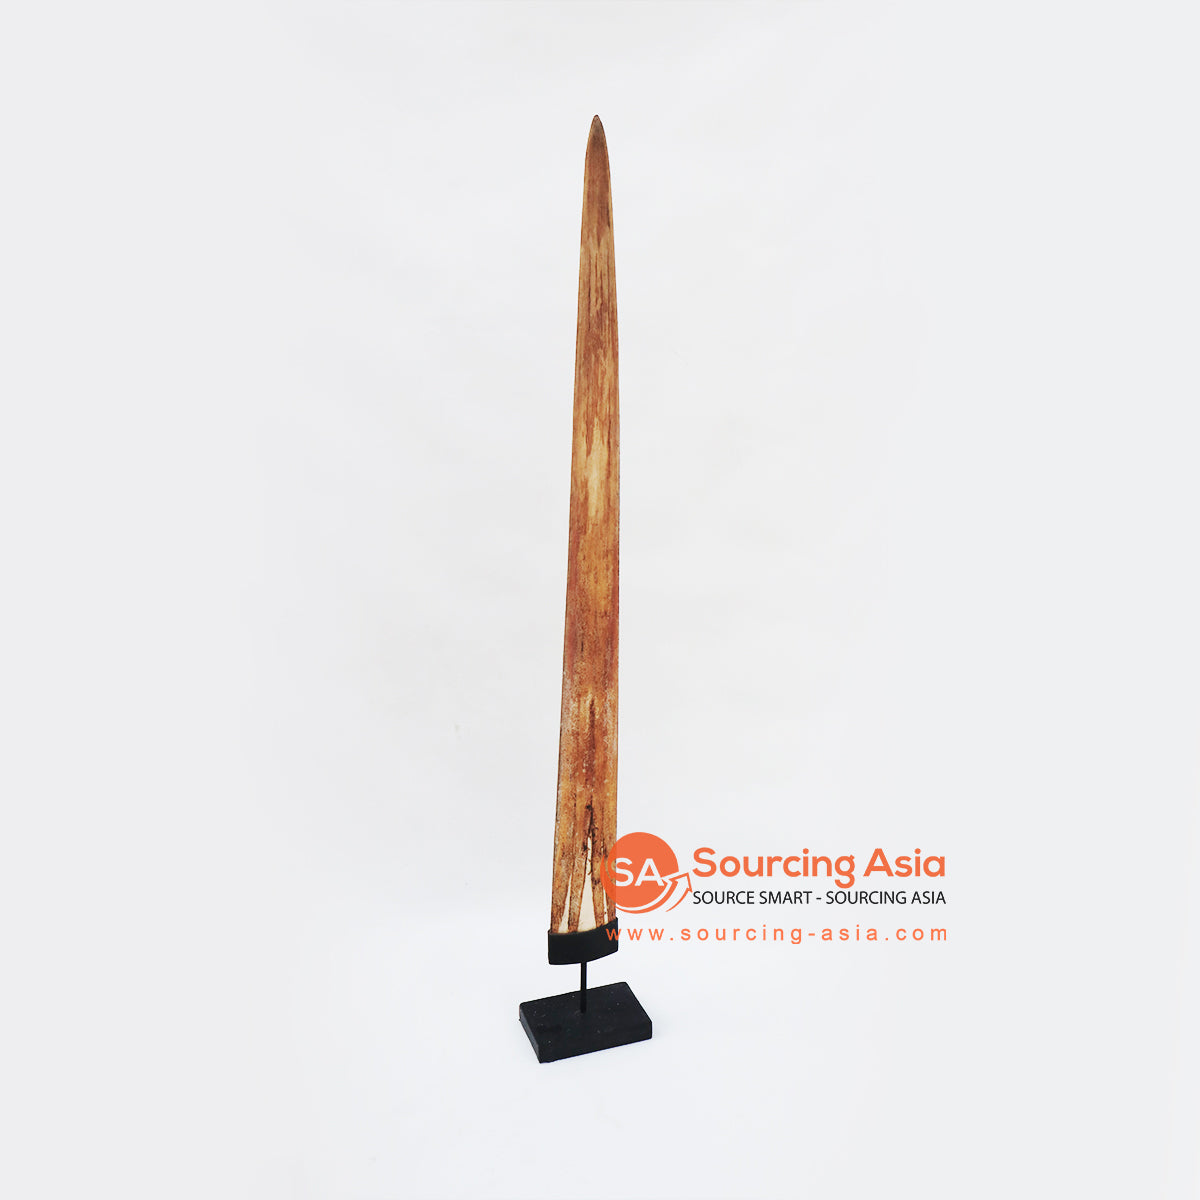 KNTC068 NATURAL MARLIN TOOTH BONE ON STAND DECORATION